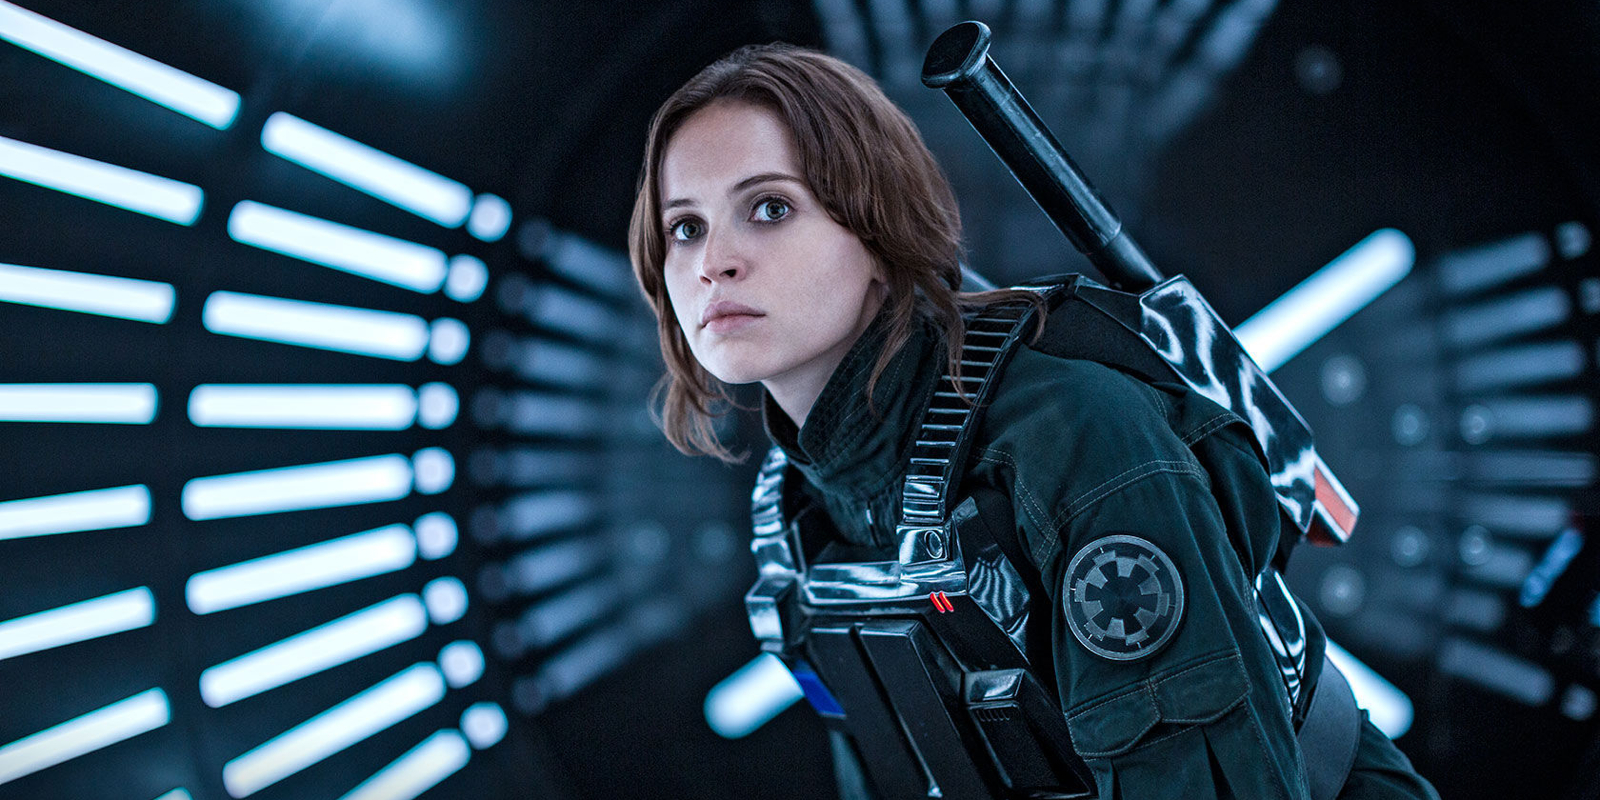 It’s an exciting time for women in sci-fi and fantasy films